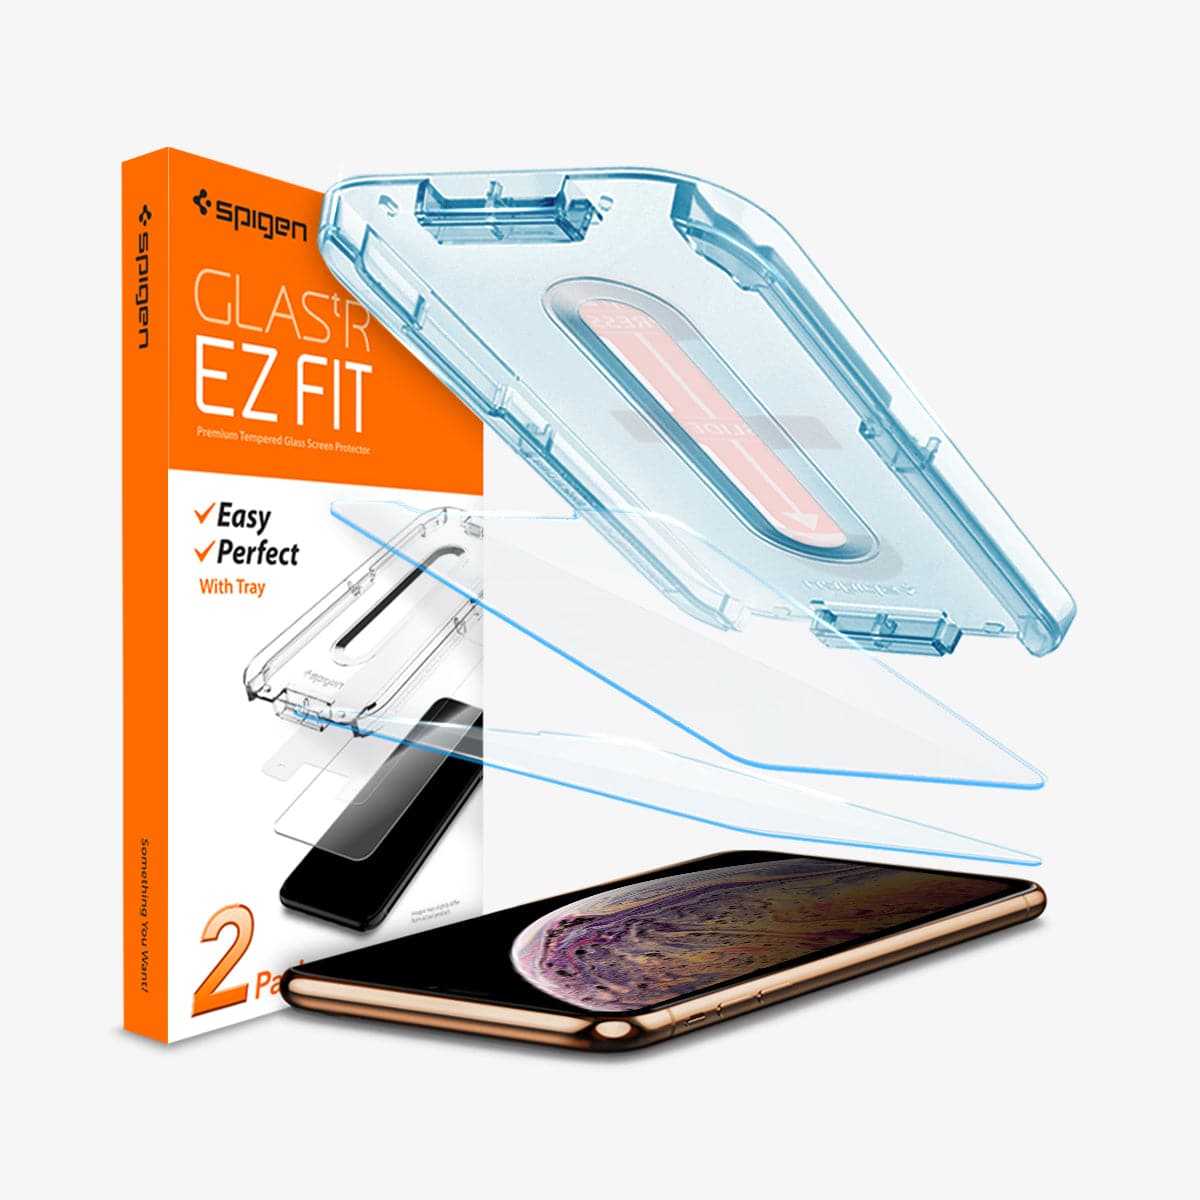 065GL25359 - iPhone XS Max Screen Protector GLAS.tR EZ Fit showing the device, ez fit tray, two screen protectors and packaging